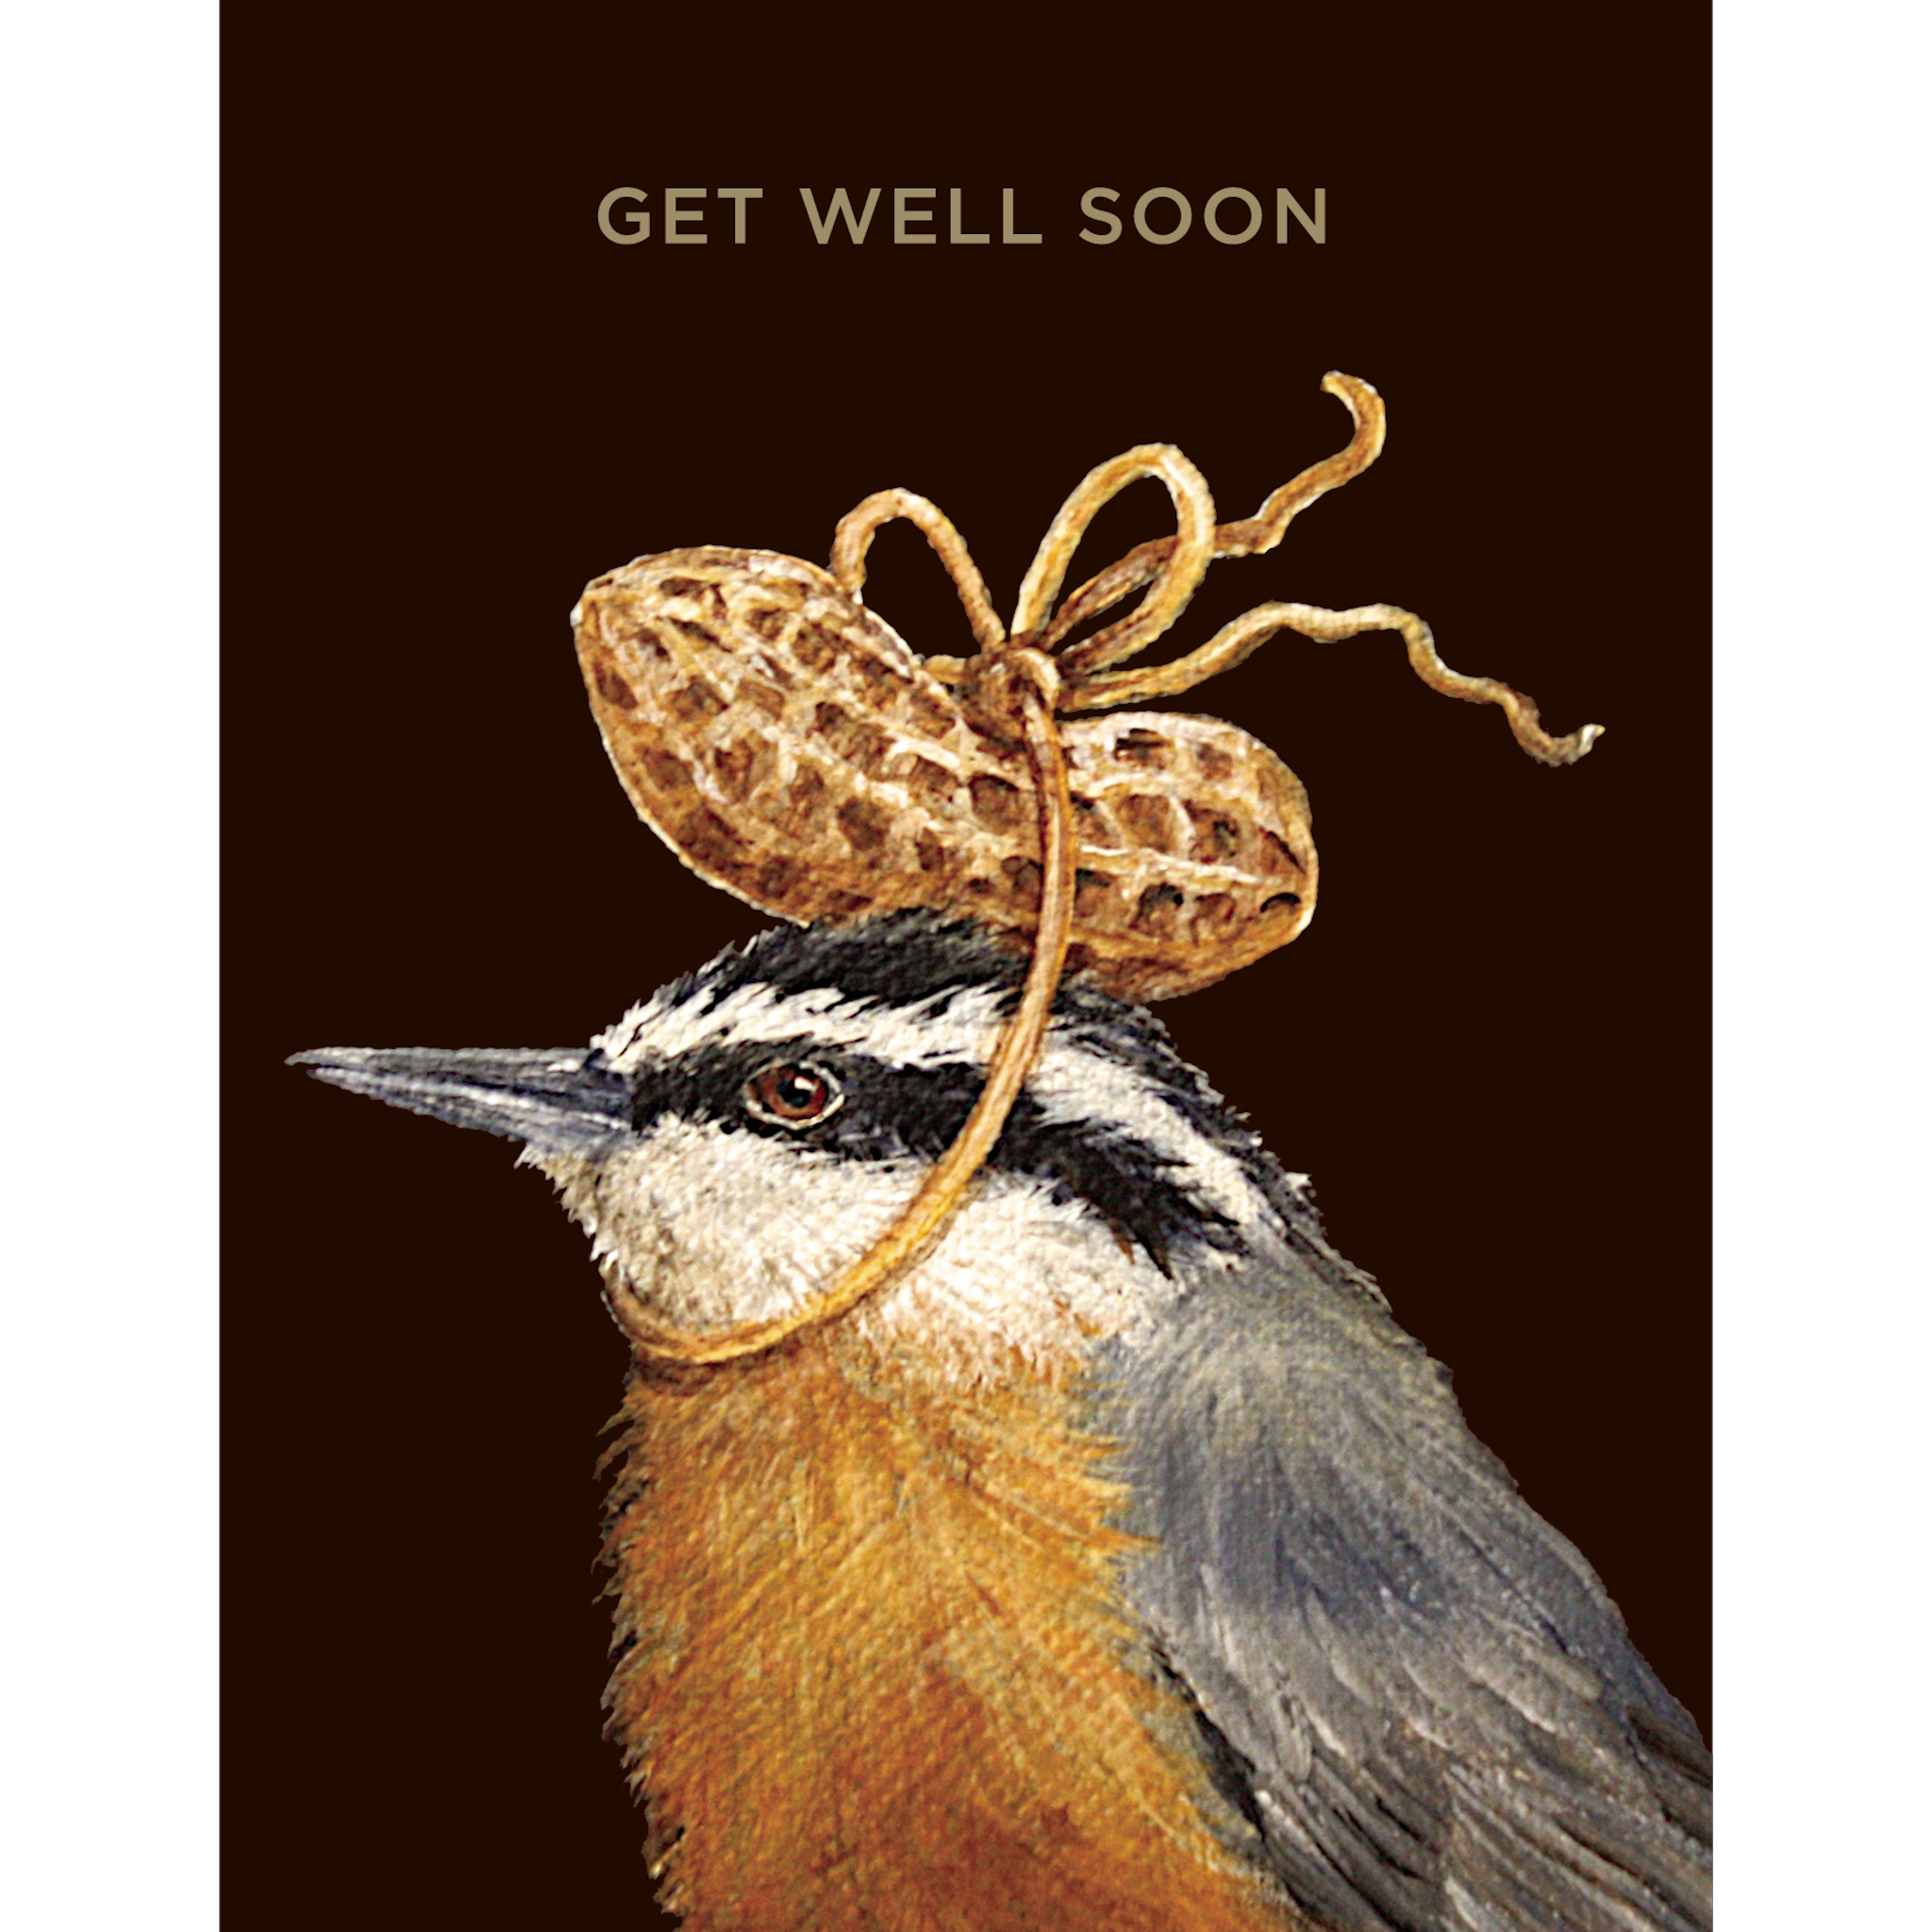 A Hester &amp; Cook card with an original artwork by Vicki Sawyer featuring a bird wearing a hat and saying &quot;Get Well Peanut.